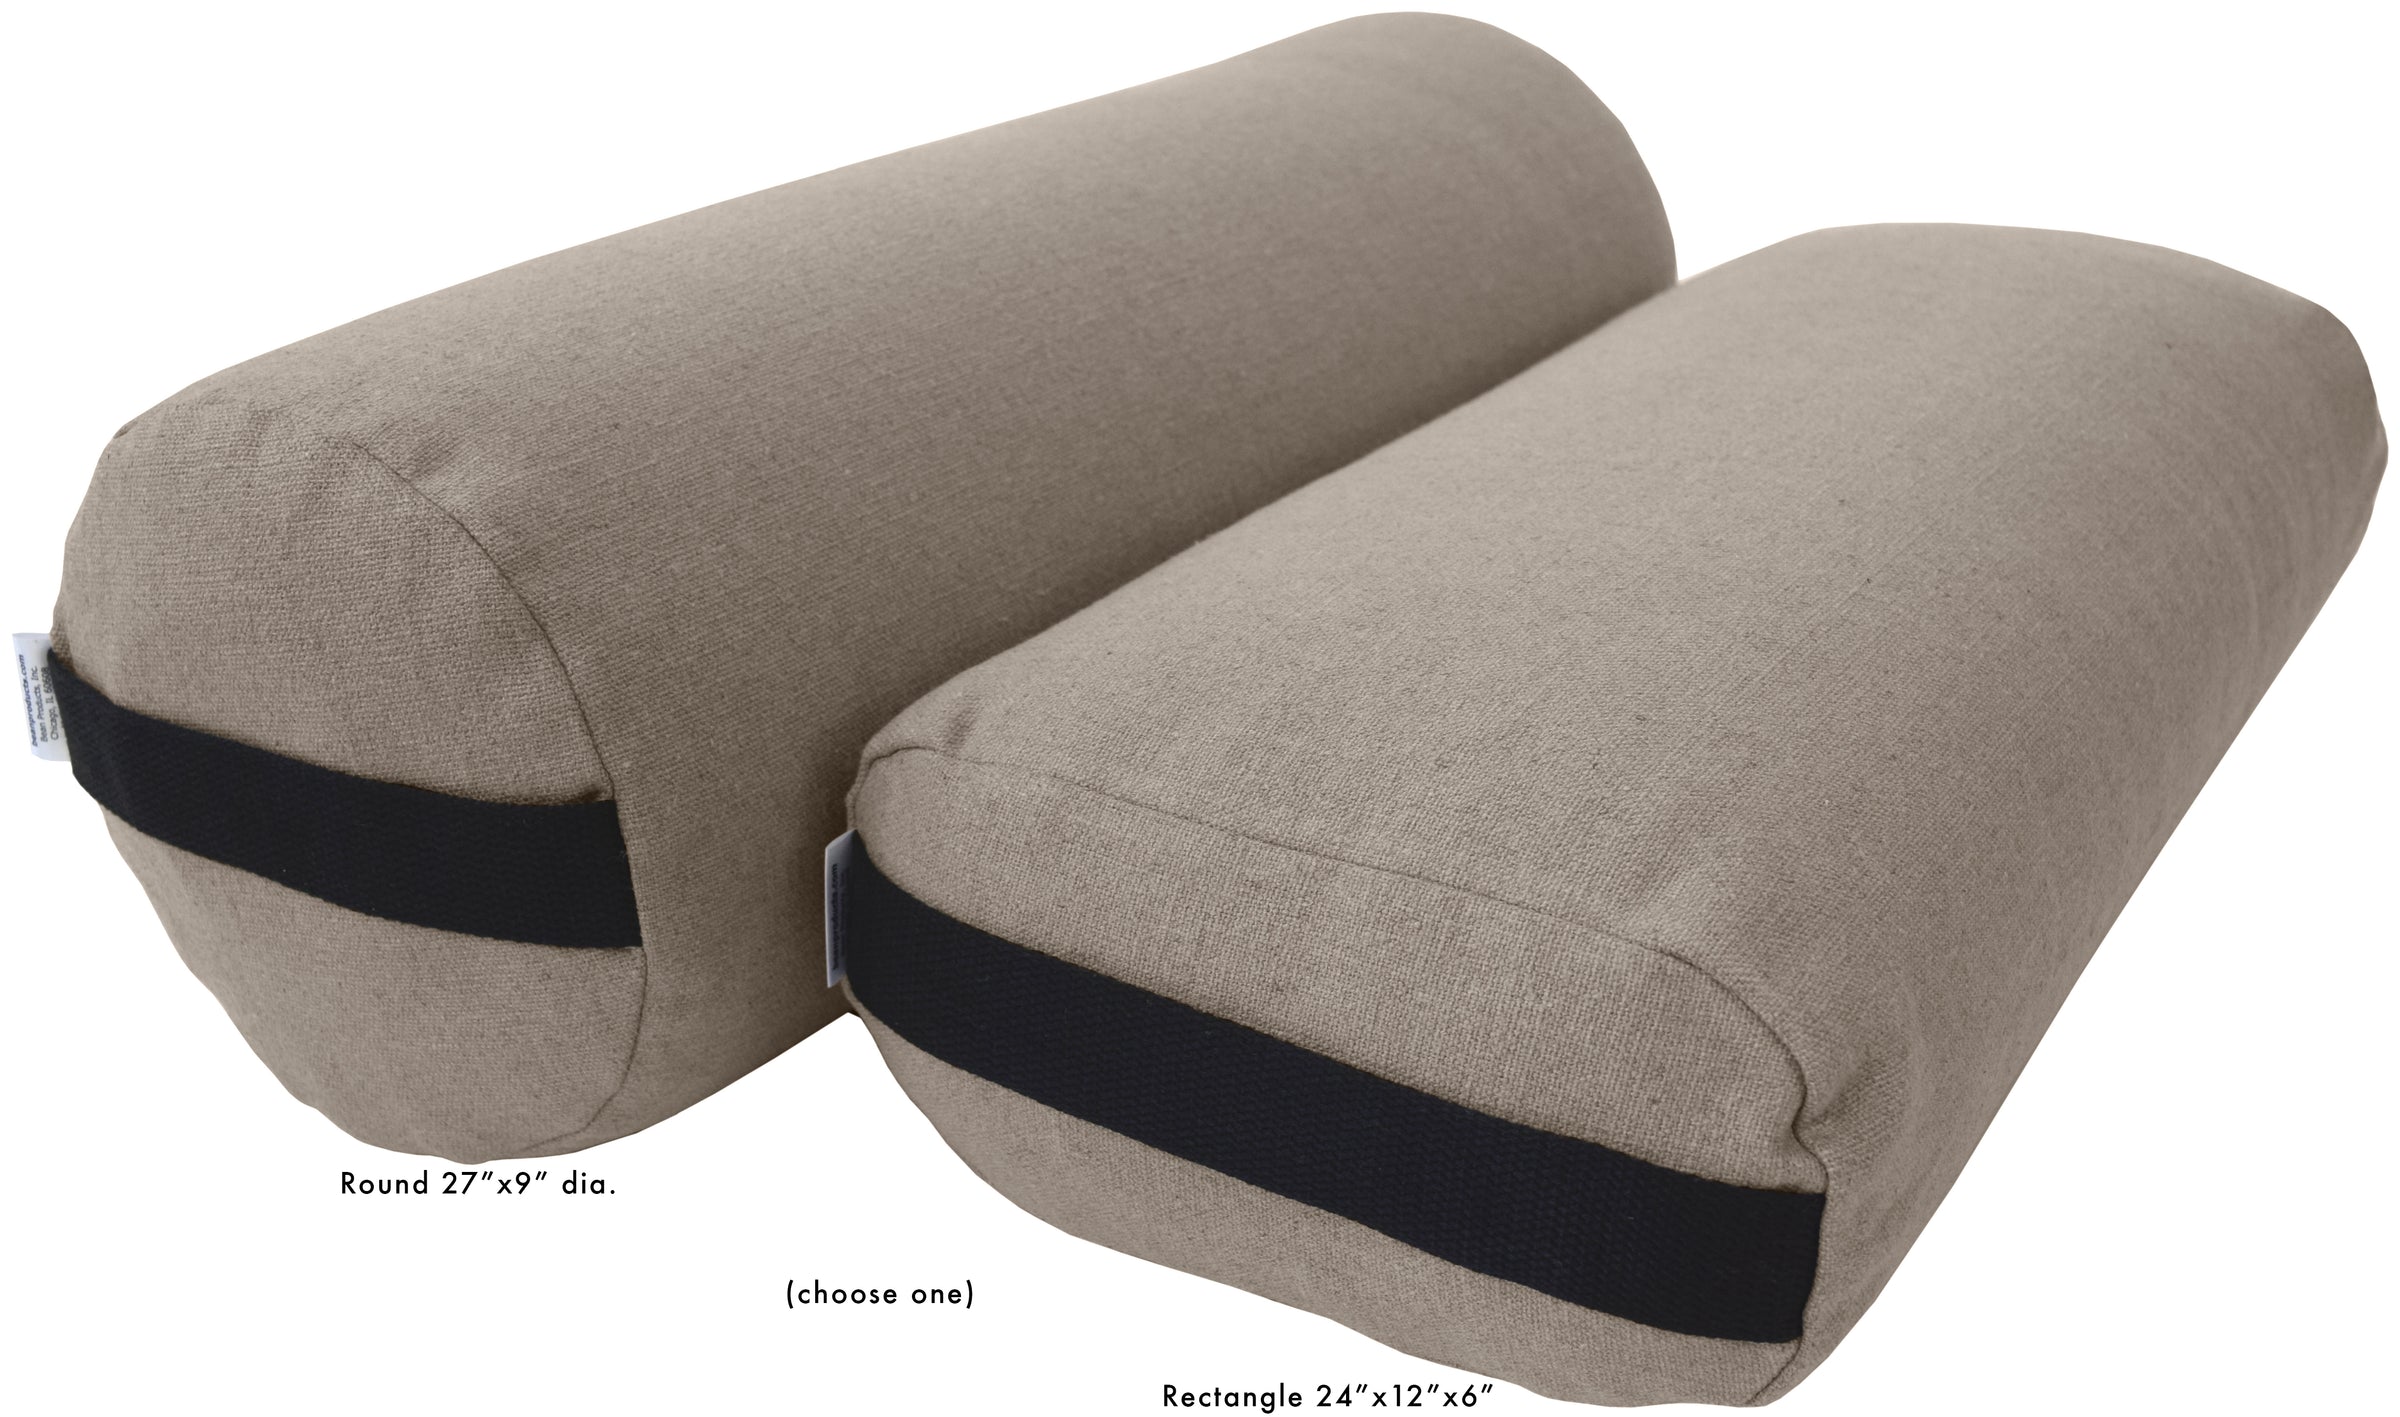 How to choose the right yoga bolster? Rectangular, round